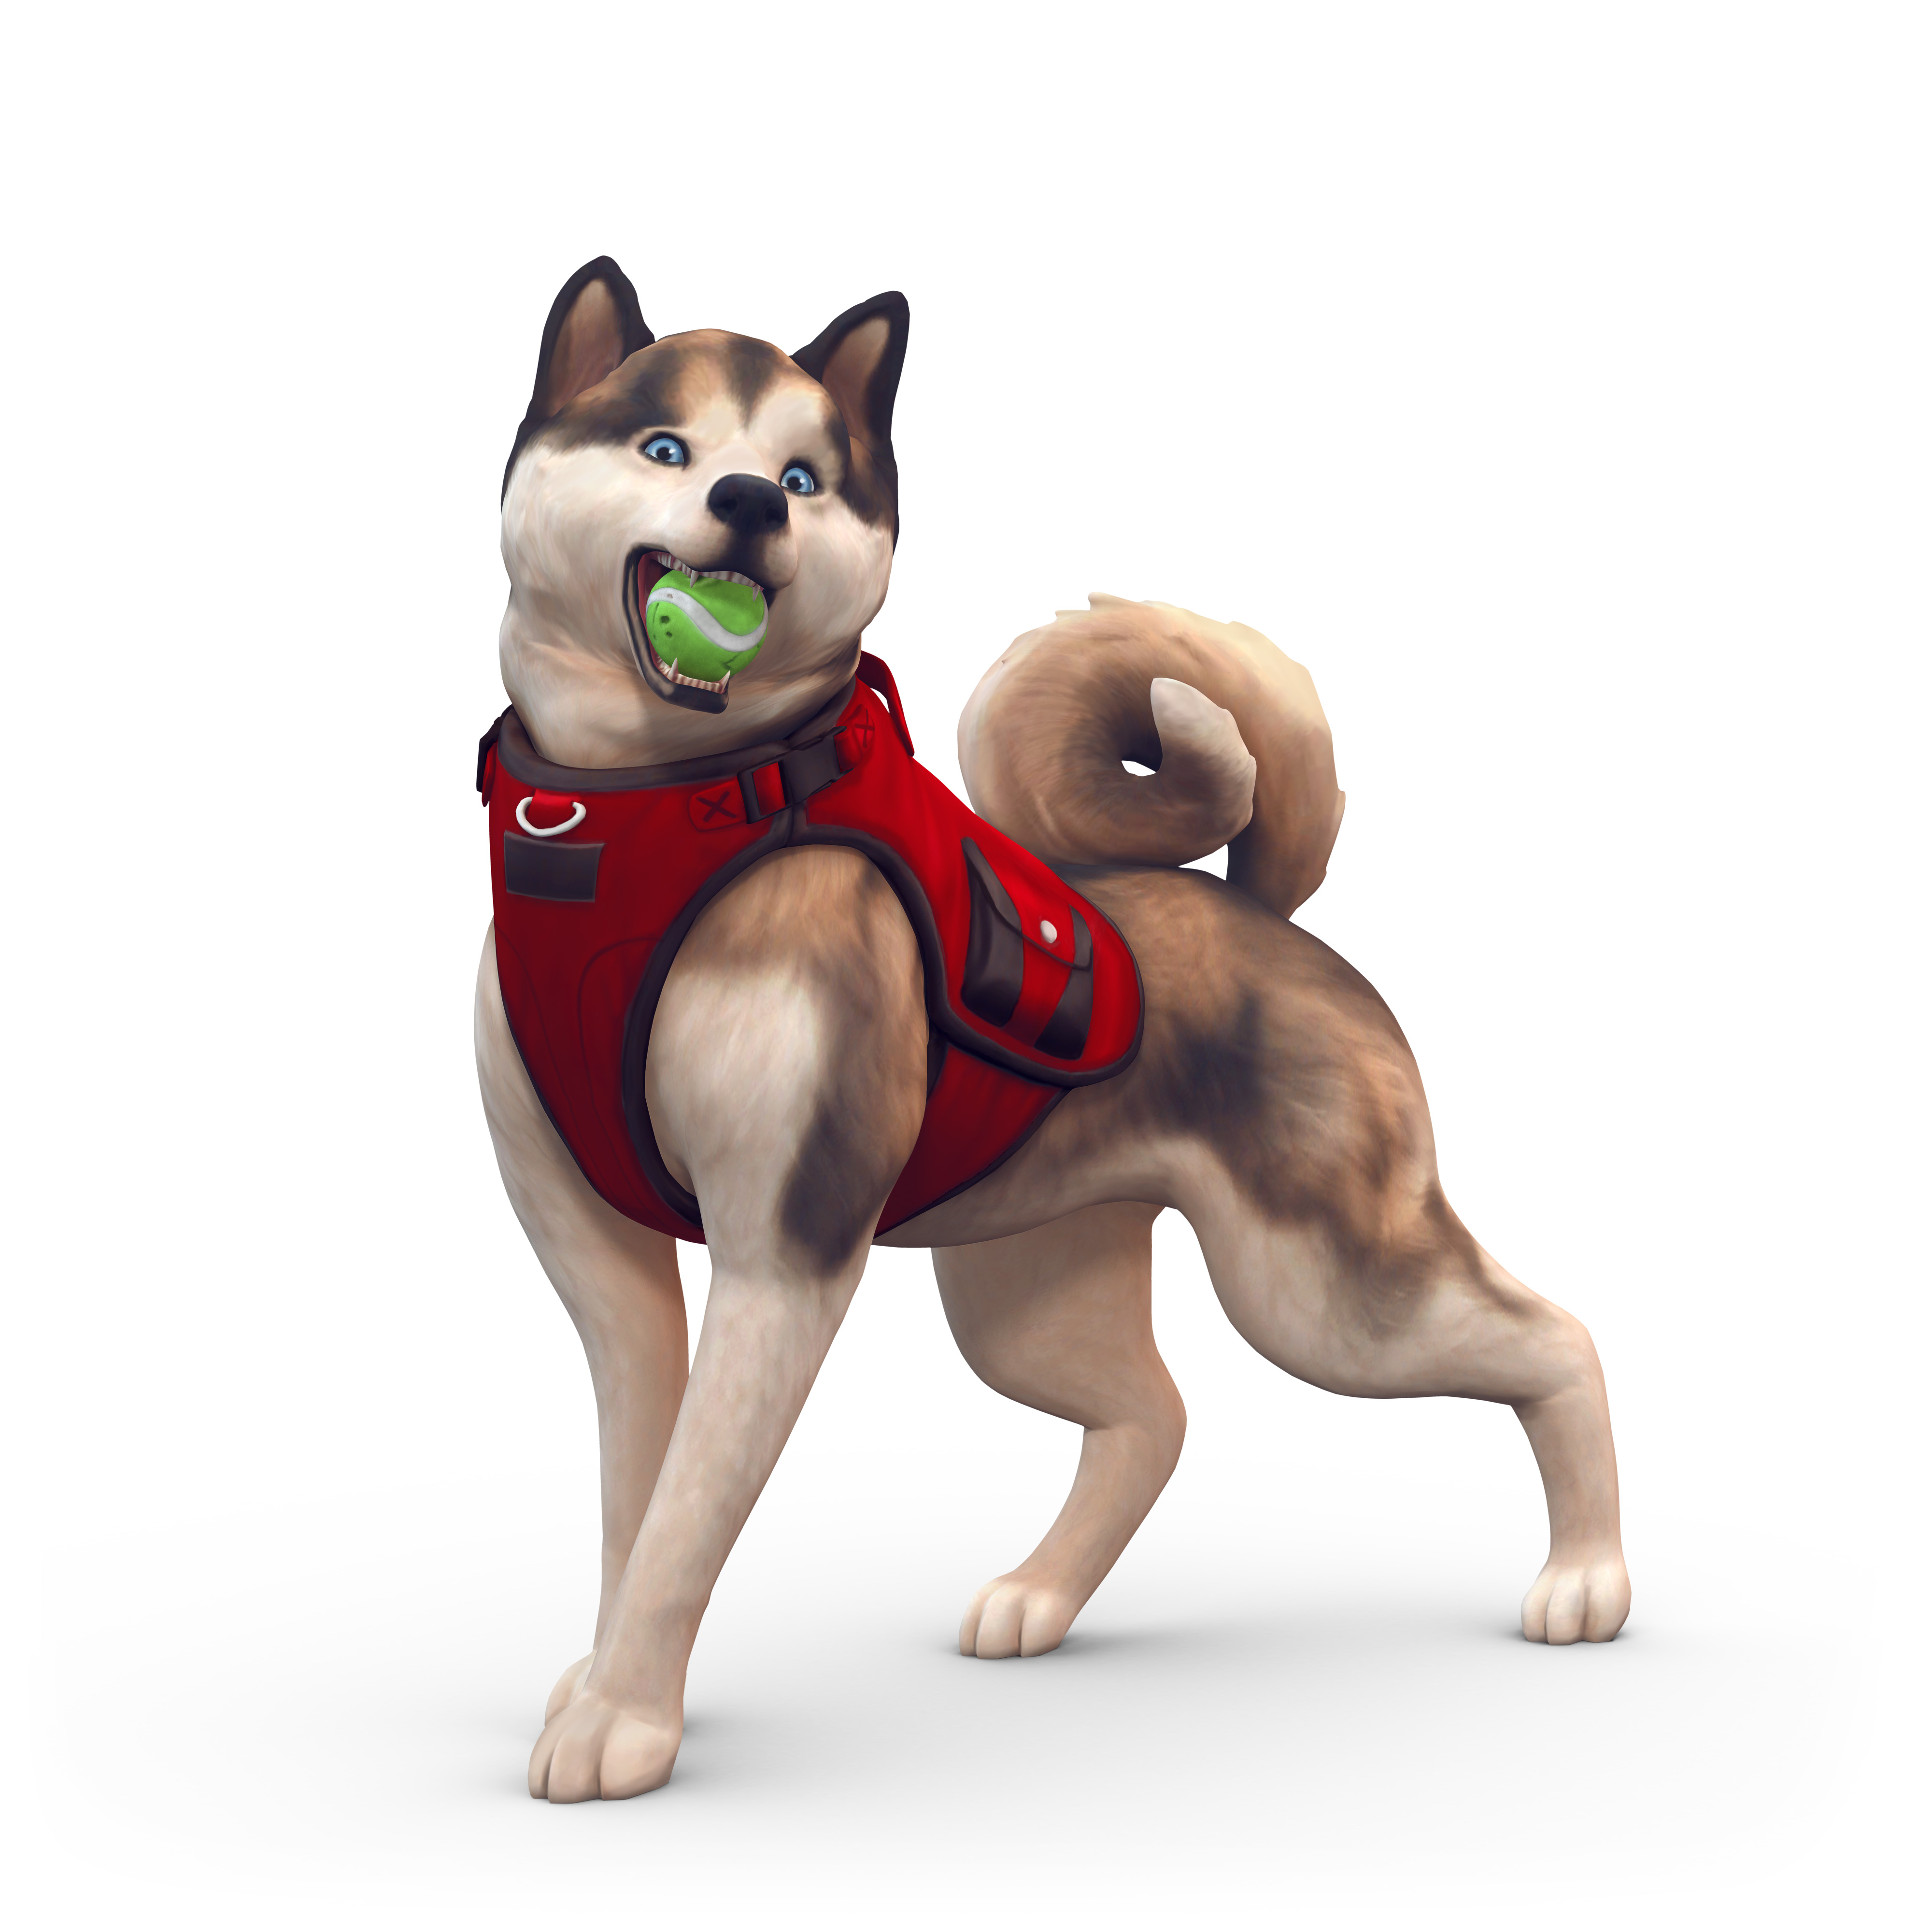 sims 4 cats and dogs key generator